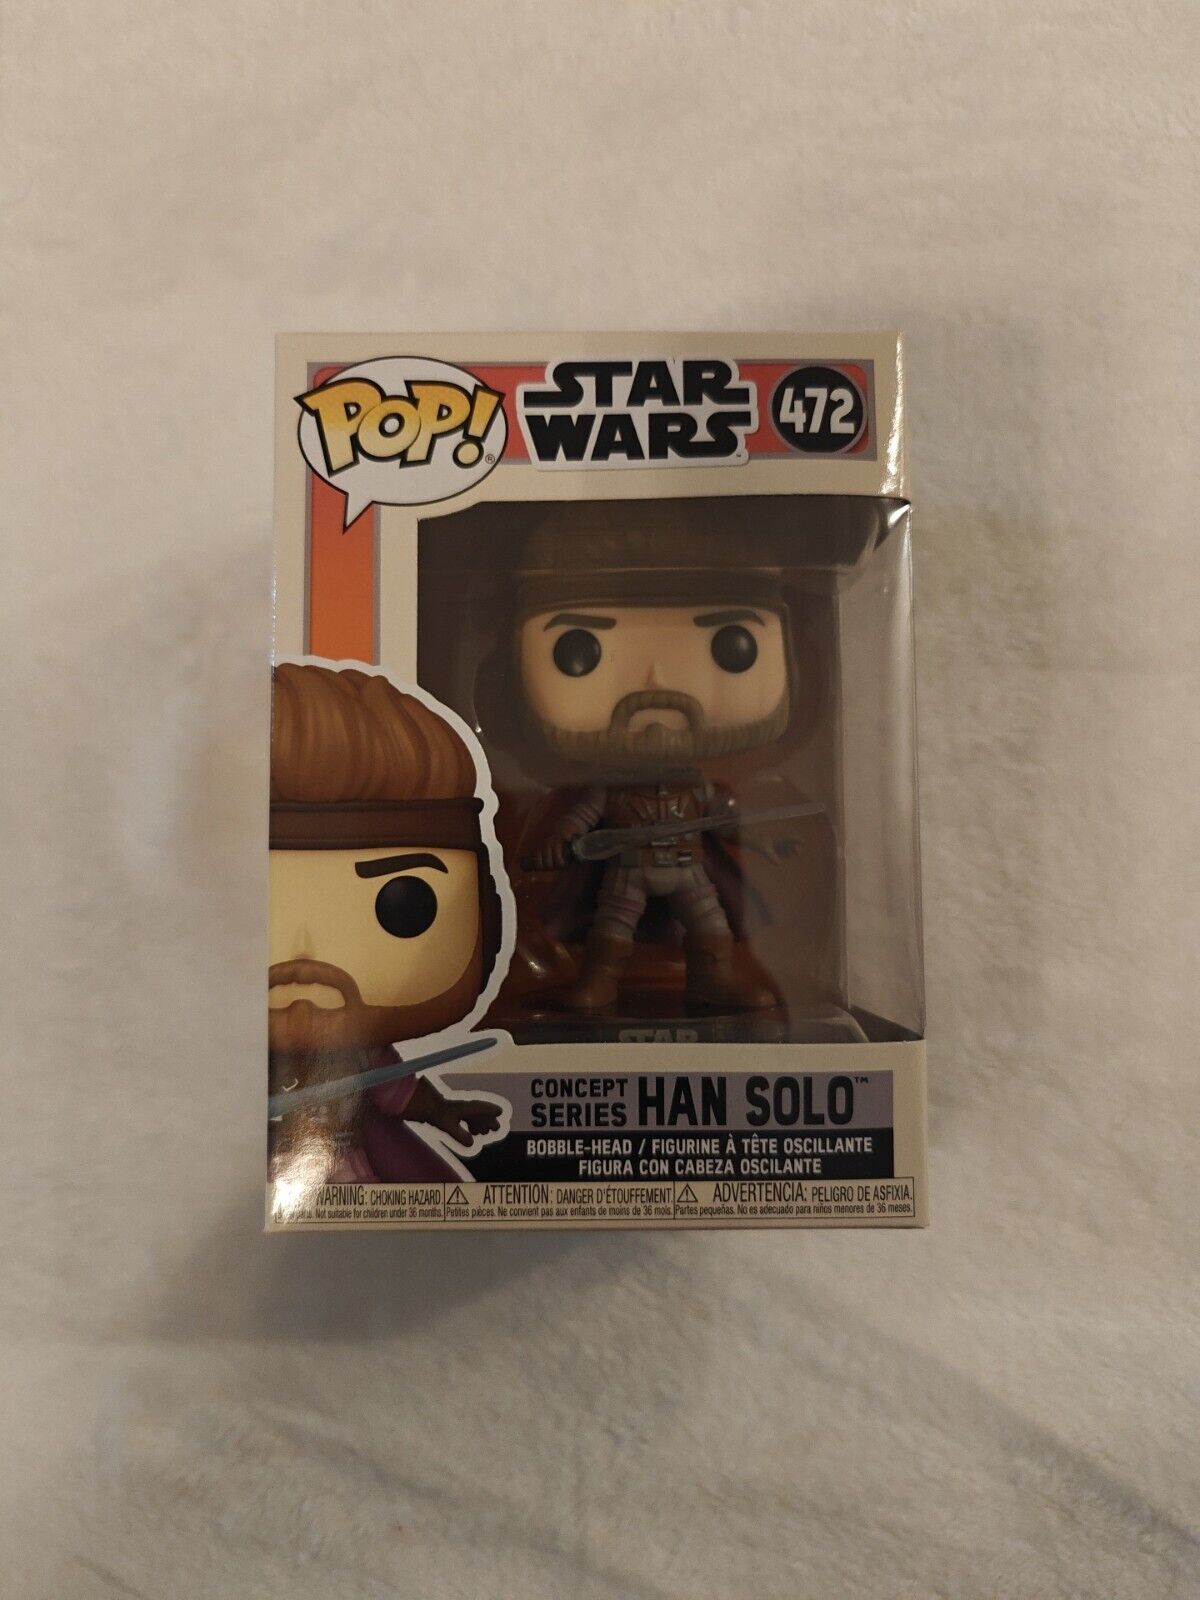 FUNKO POP STAR WRAS HAN SOLO #472 CONCEPT SERIES - VAULTED